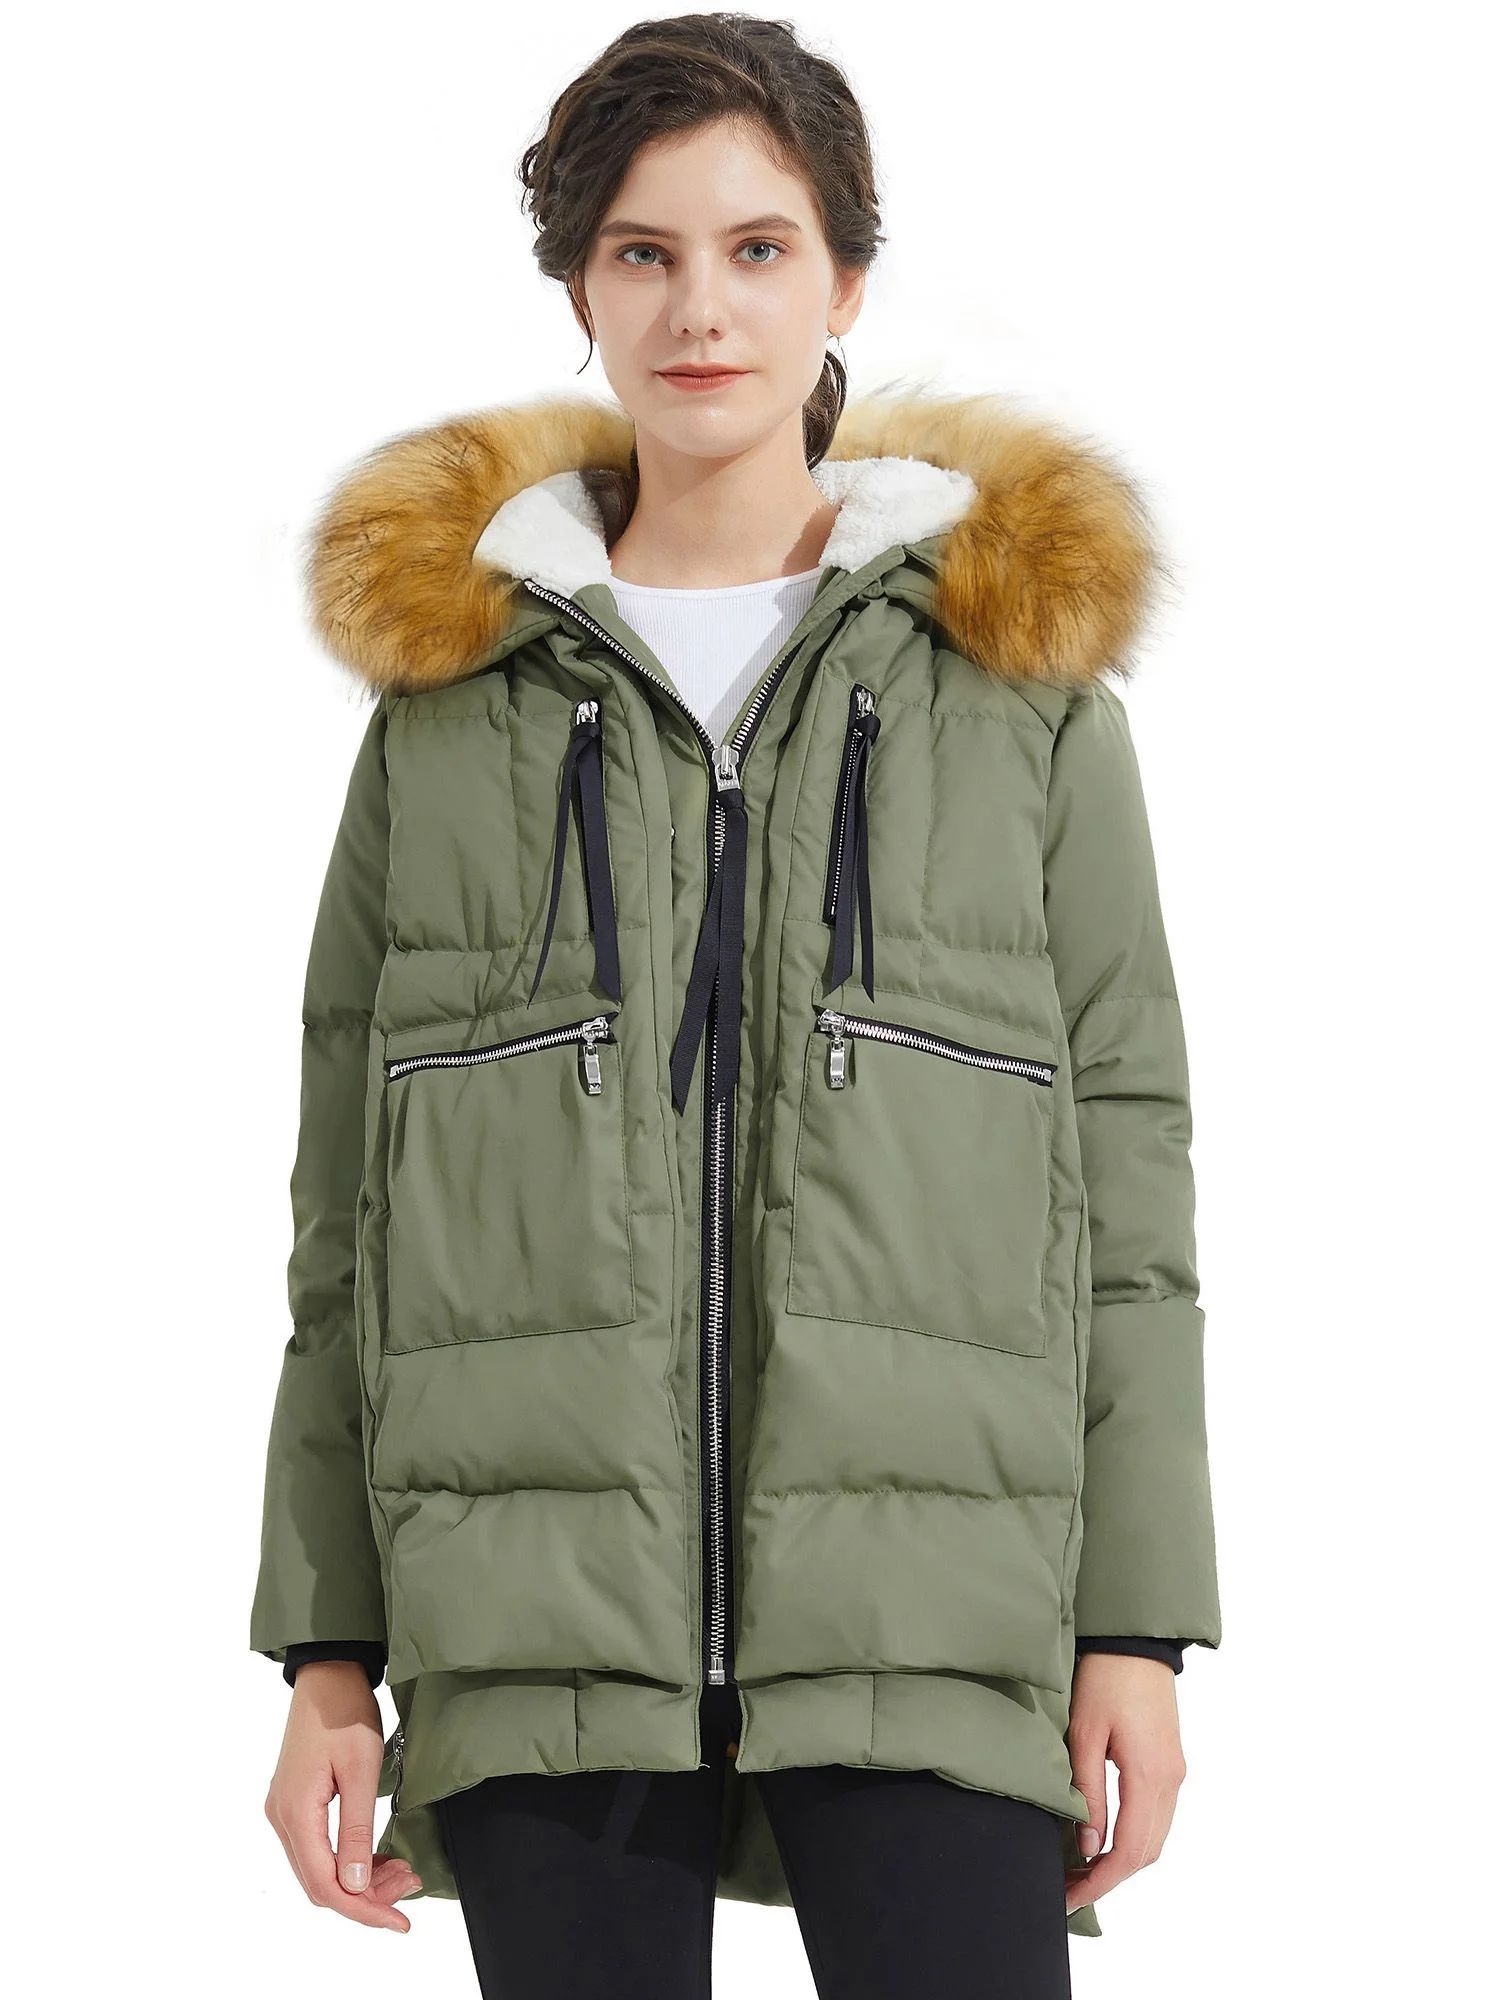 Orolay Women's Thickened Down Jacket Winter Hooded Coat with Faux Fur Trim | Walmart (US)